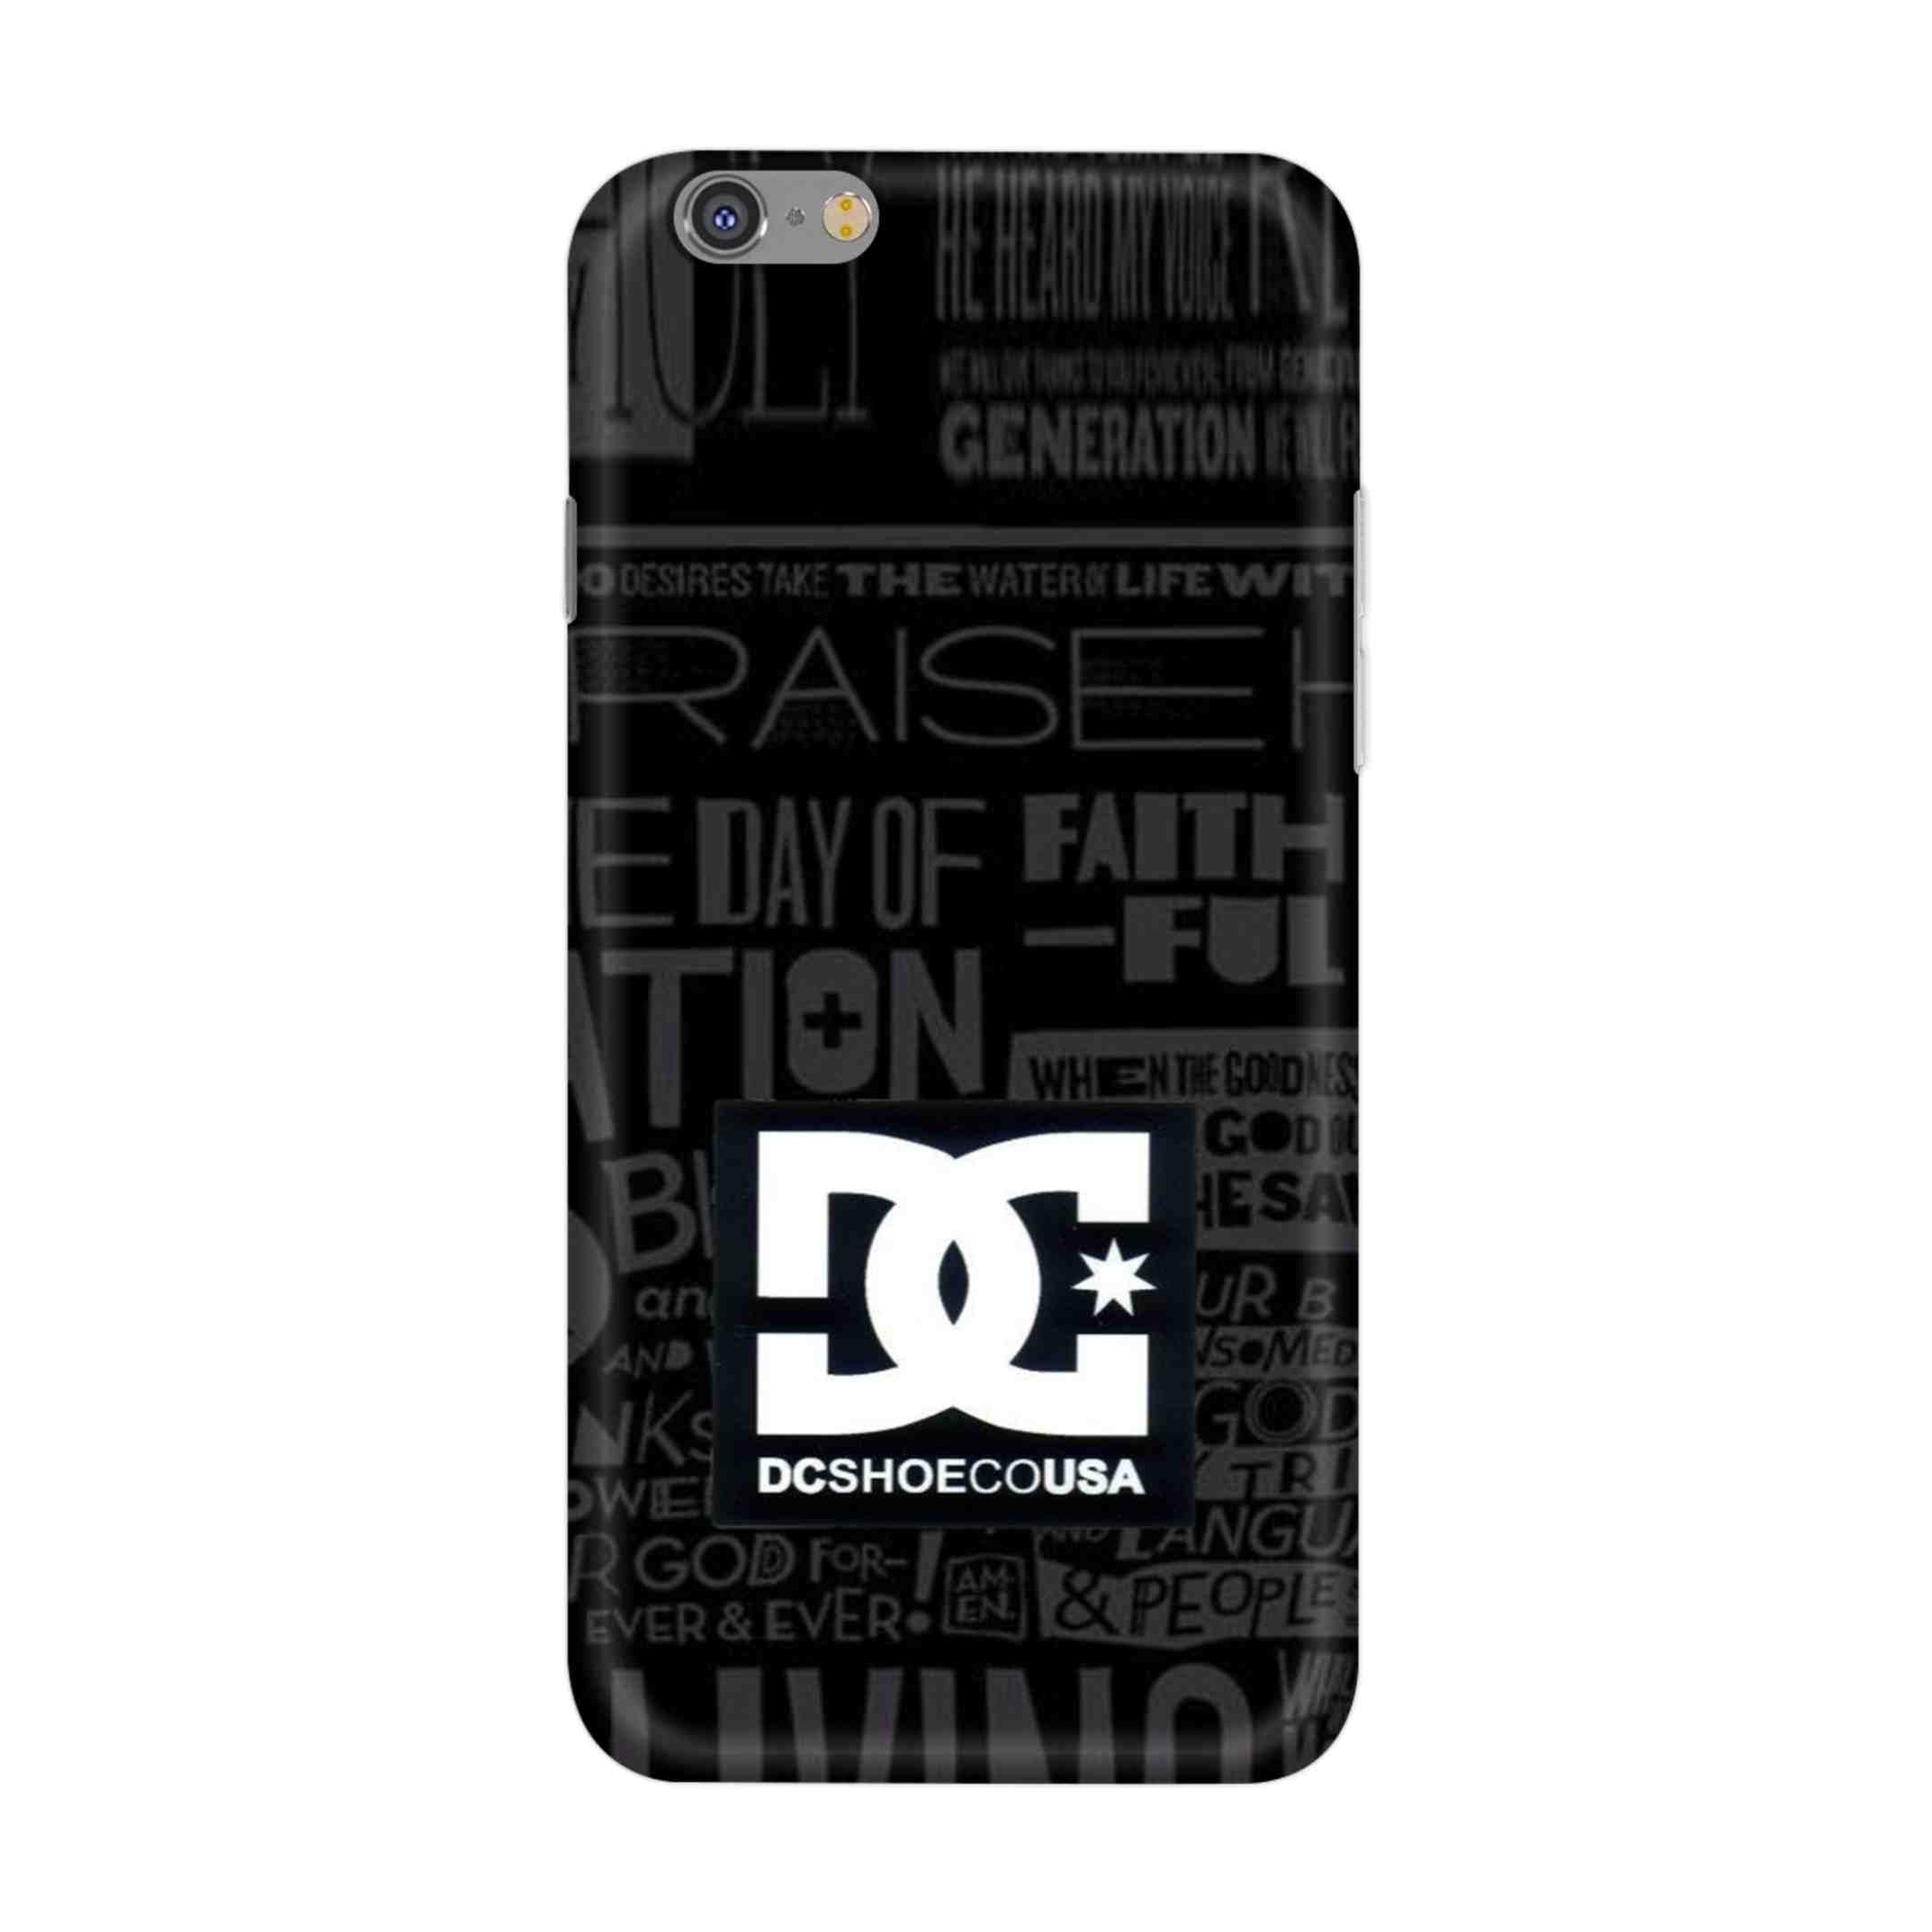 Buy Dc Shoecousa Hard Back Mobile Phone Case/Cover For iPhone 6 / 6s Online